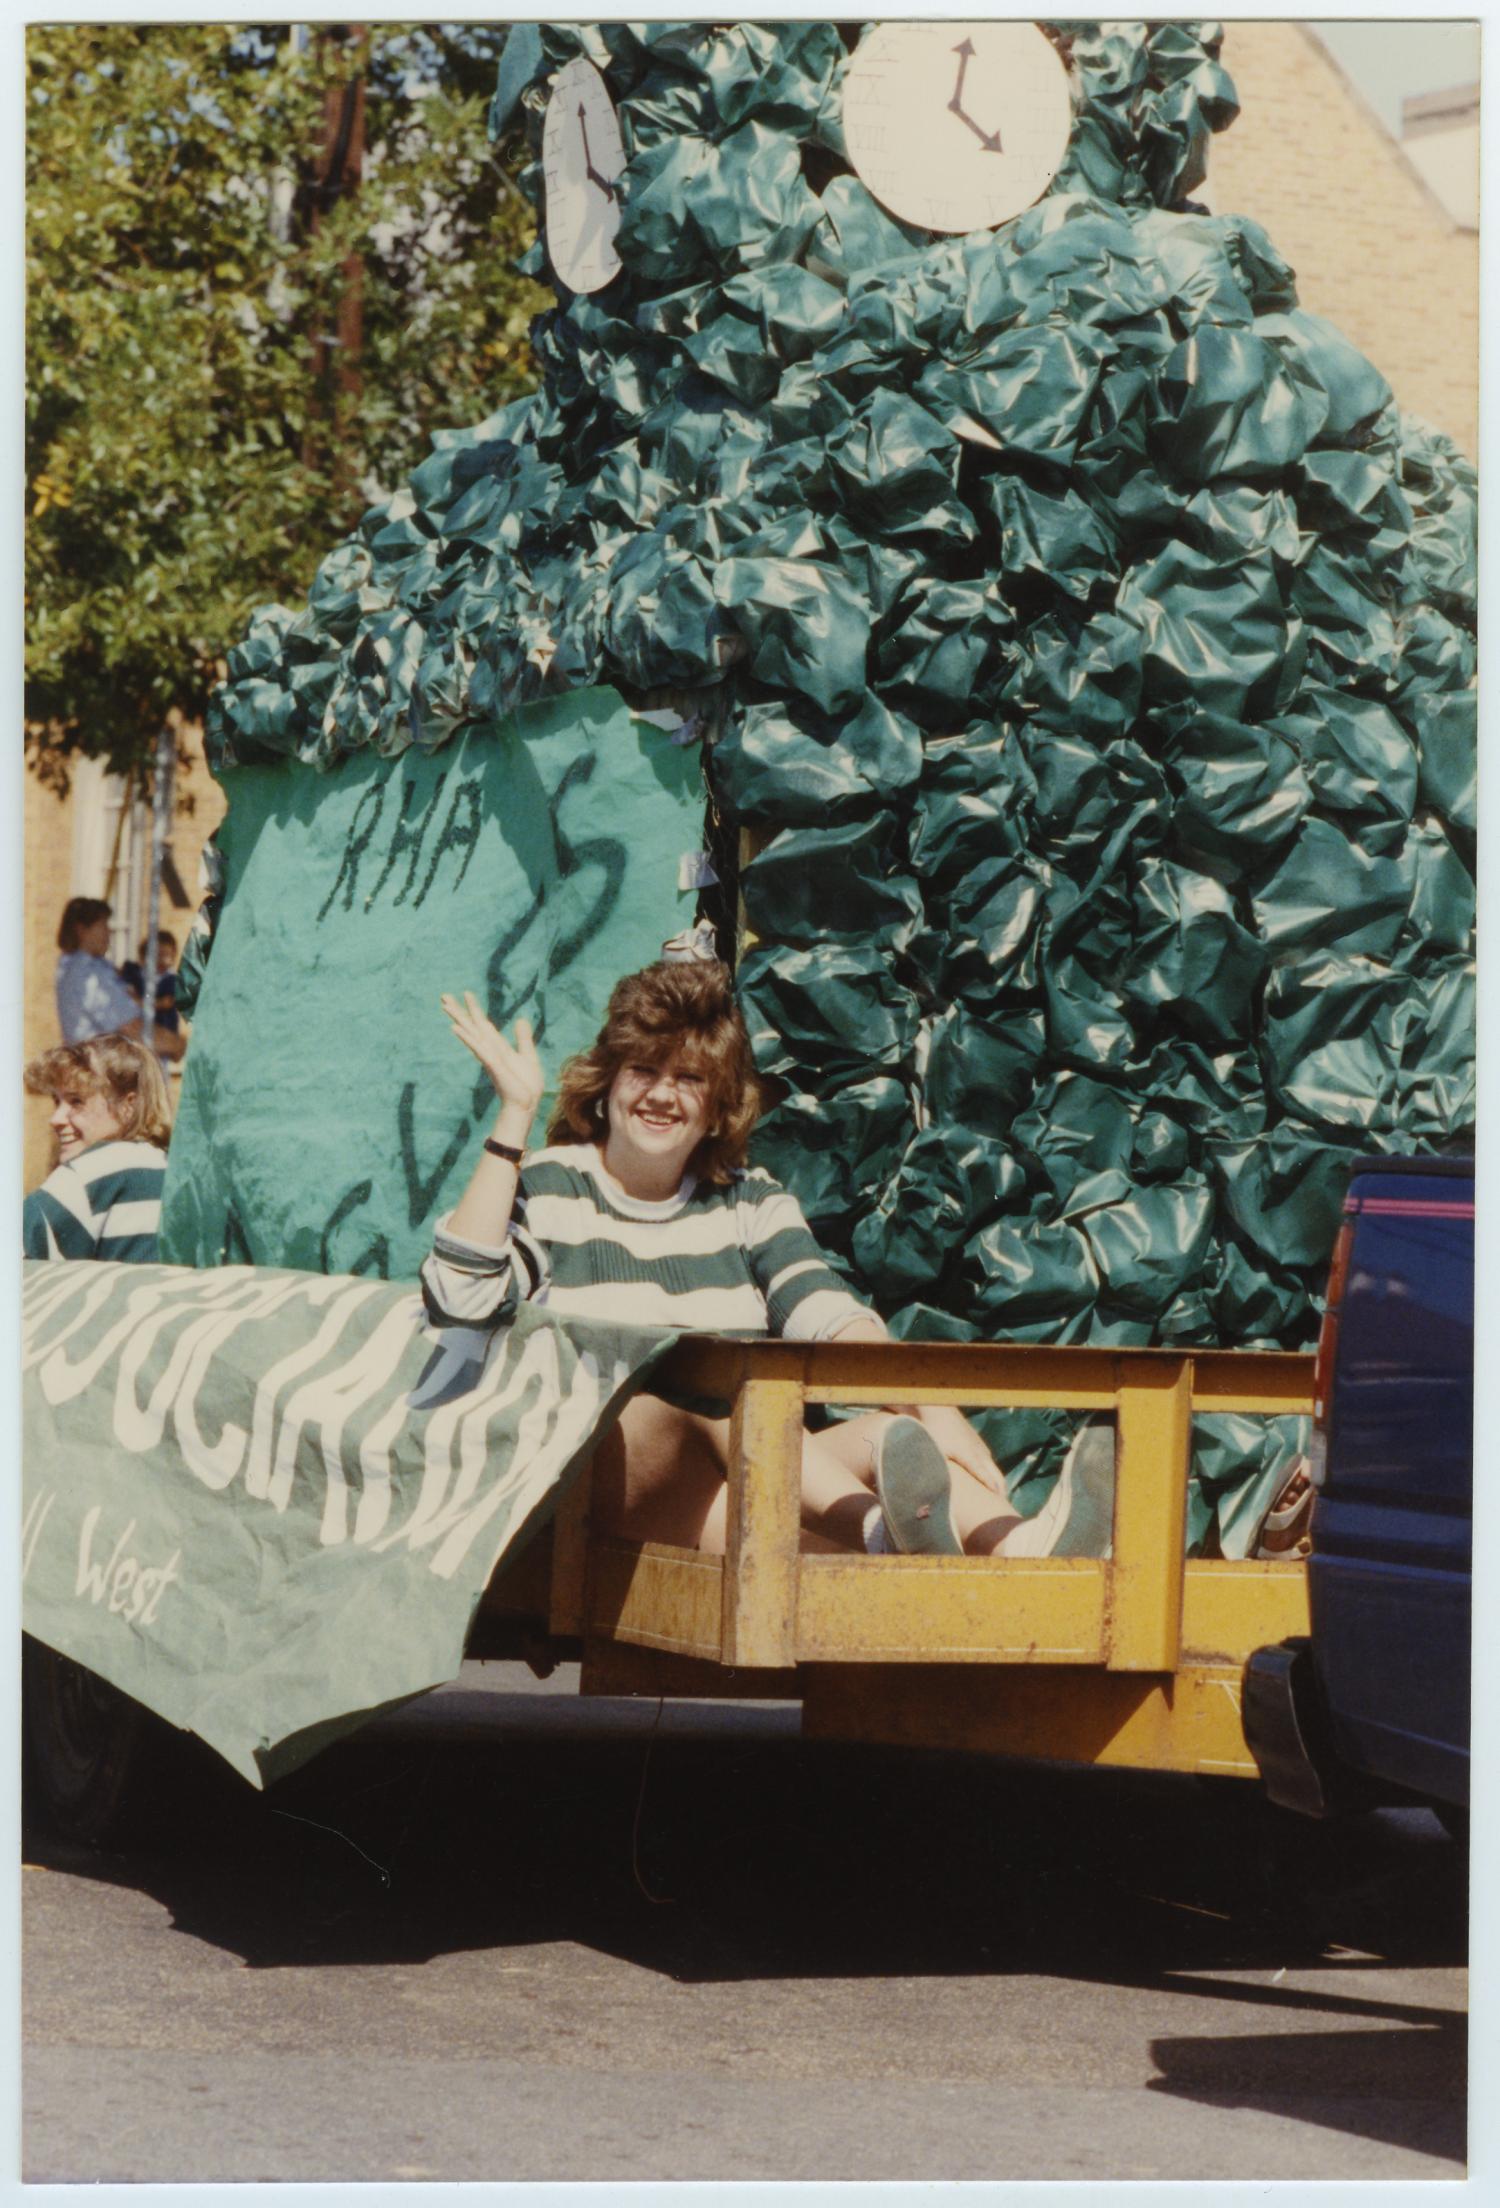 [North Texas Homecoming Parade, 1992]
                                                
                                                    [Sequence #]: 1 of 2
                                                